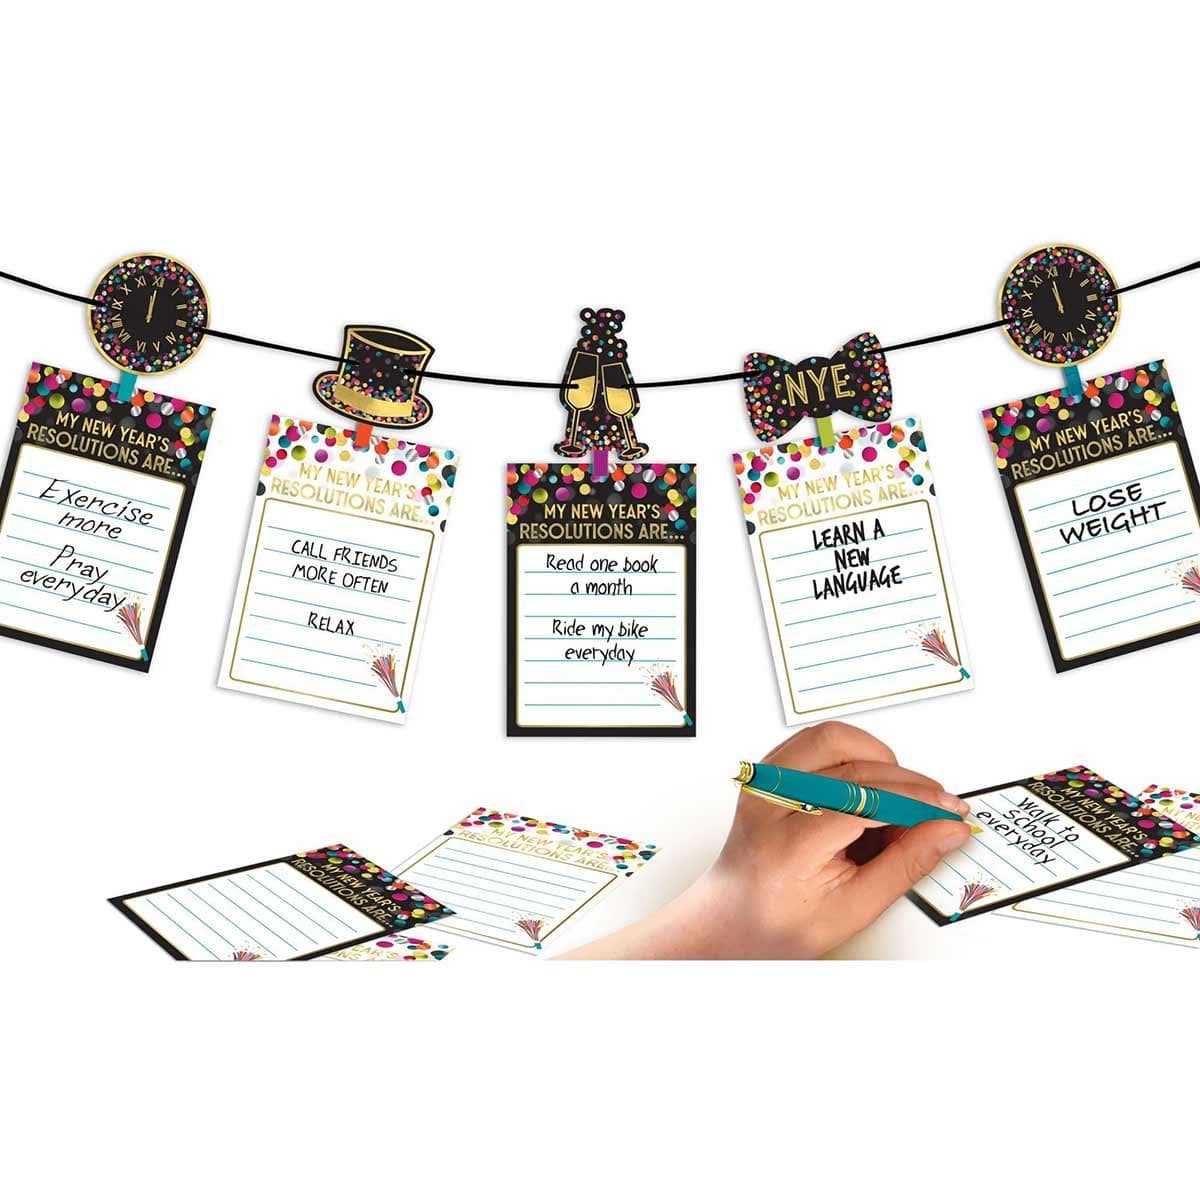 Buy New Year Resolution Garland - Colorful Confetti sold at Party Expert